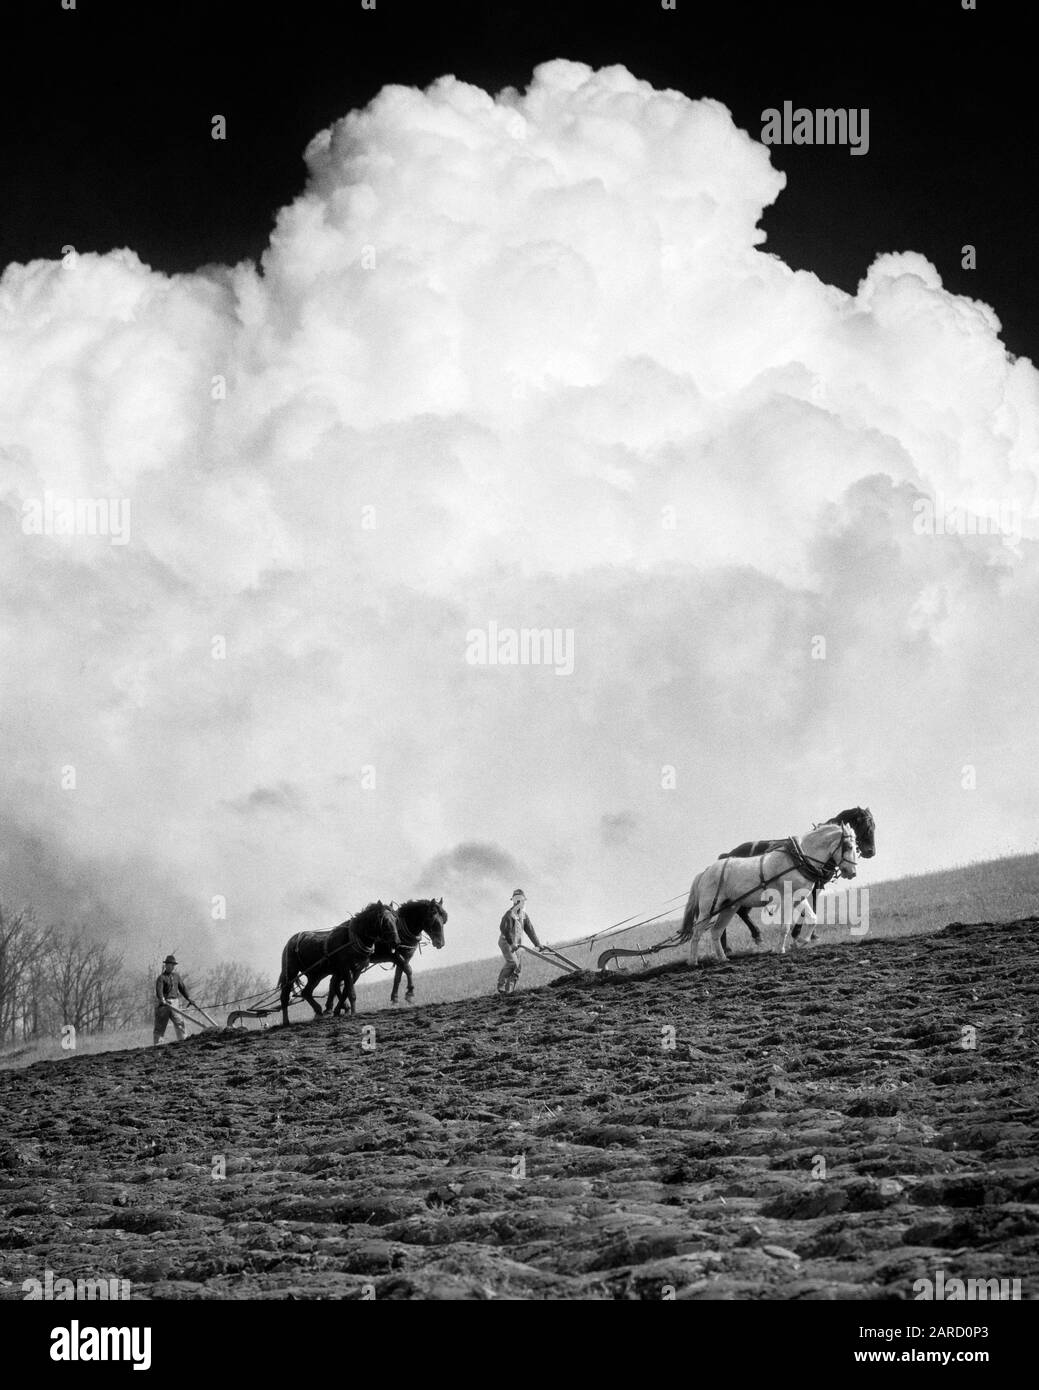 1920s 1930s 1940s TWO ANONYMOUS SILHOUETTED FARMERS EACH BEHIND A TWO HORSE TEAM PLOWING A FIELD TO PREPARE FOR SPRING PLANTING - f1147 HAR001 HARS COPY SPACE FULL-LENGTH PERSONS SCENIC FARMING MALES SPIRITUALITY MIDDLE-AGED AGRICULTURE B&W MIDDLE-AGED MAN WIDE ANGLE CLOUDS SKILL OCCUPATION SKILLS MAMMALS PREPARE STRENGTH STRATEGY PLOW SILHOUETTED FARMERS POWERFUL PROGRESS LABOR PLOWING PRIDE TO OCCUPATIONS CONCEPTUAL ANONYMOUS GROWTH LAND MAMMAL MID-ADULT MID-ADULT MAN PLOUGH PRECISION SPRINGTIME TEAMS TOGETHERNESS BLACK AND WHITE CUMULUS HAR001 LABORING OLD FASHIONED Stock Photo